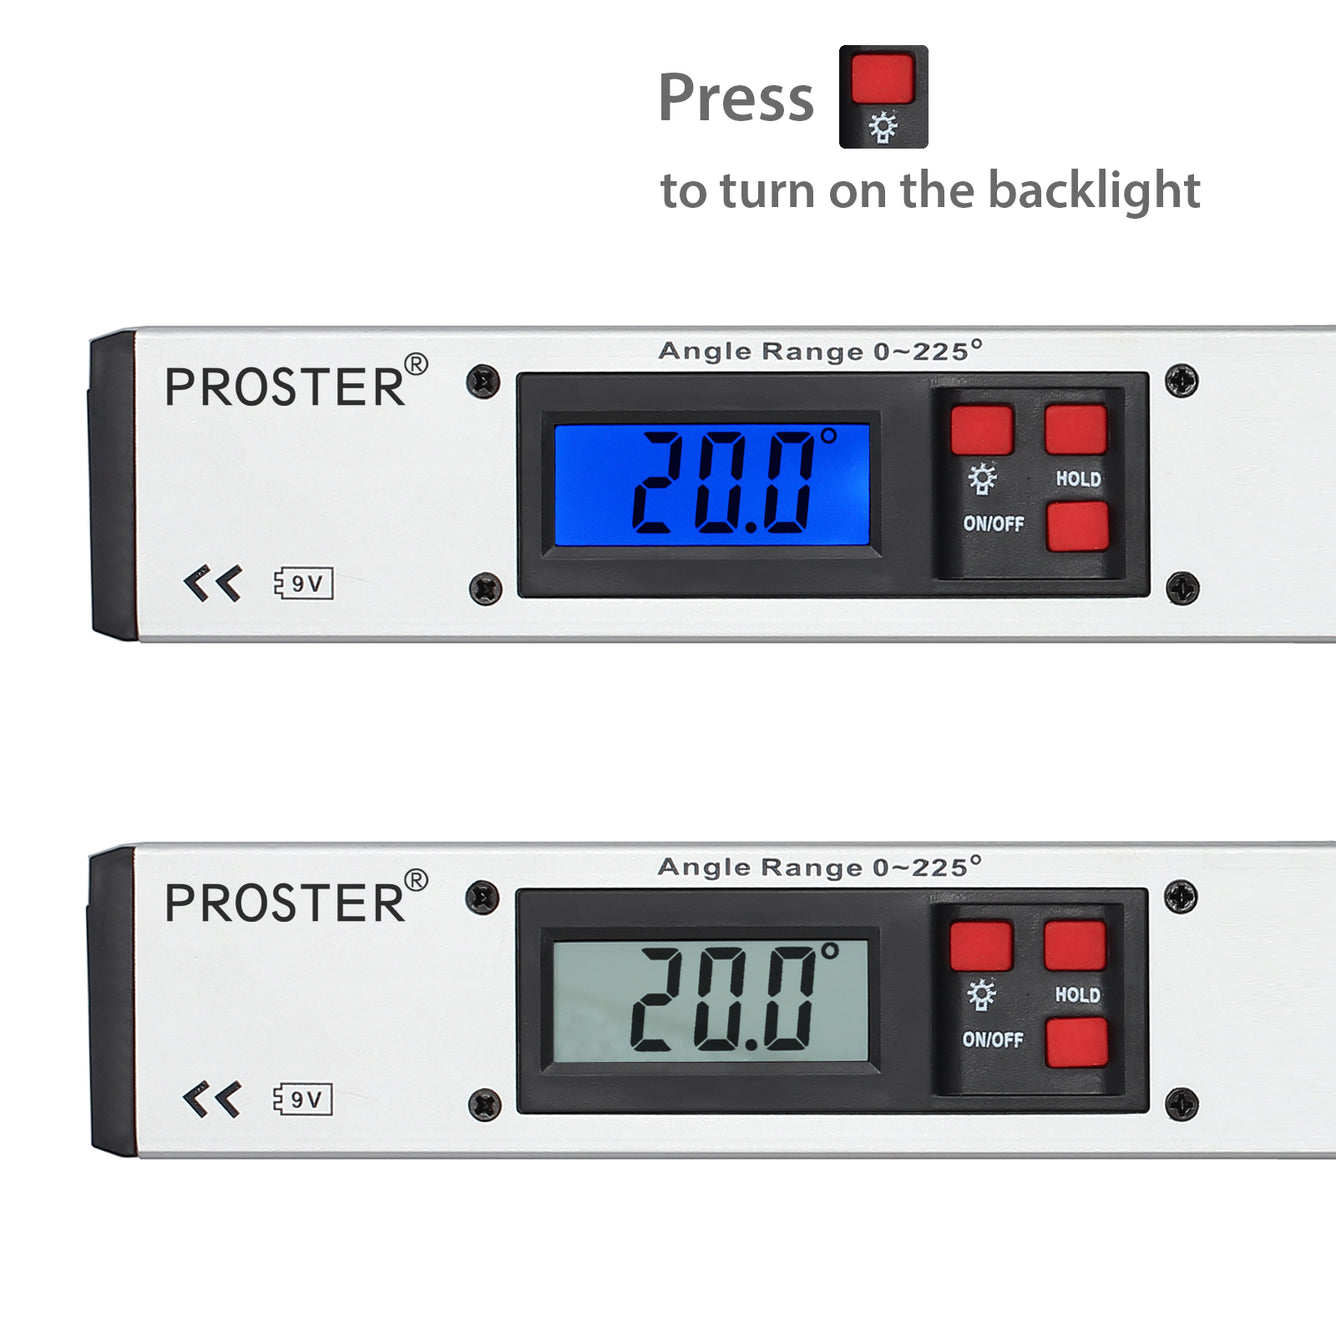 Proster 0-225°Digital Inclinometer Protractor Angle Finder US